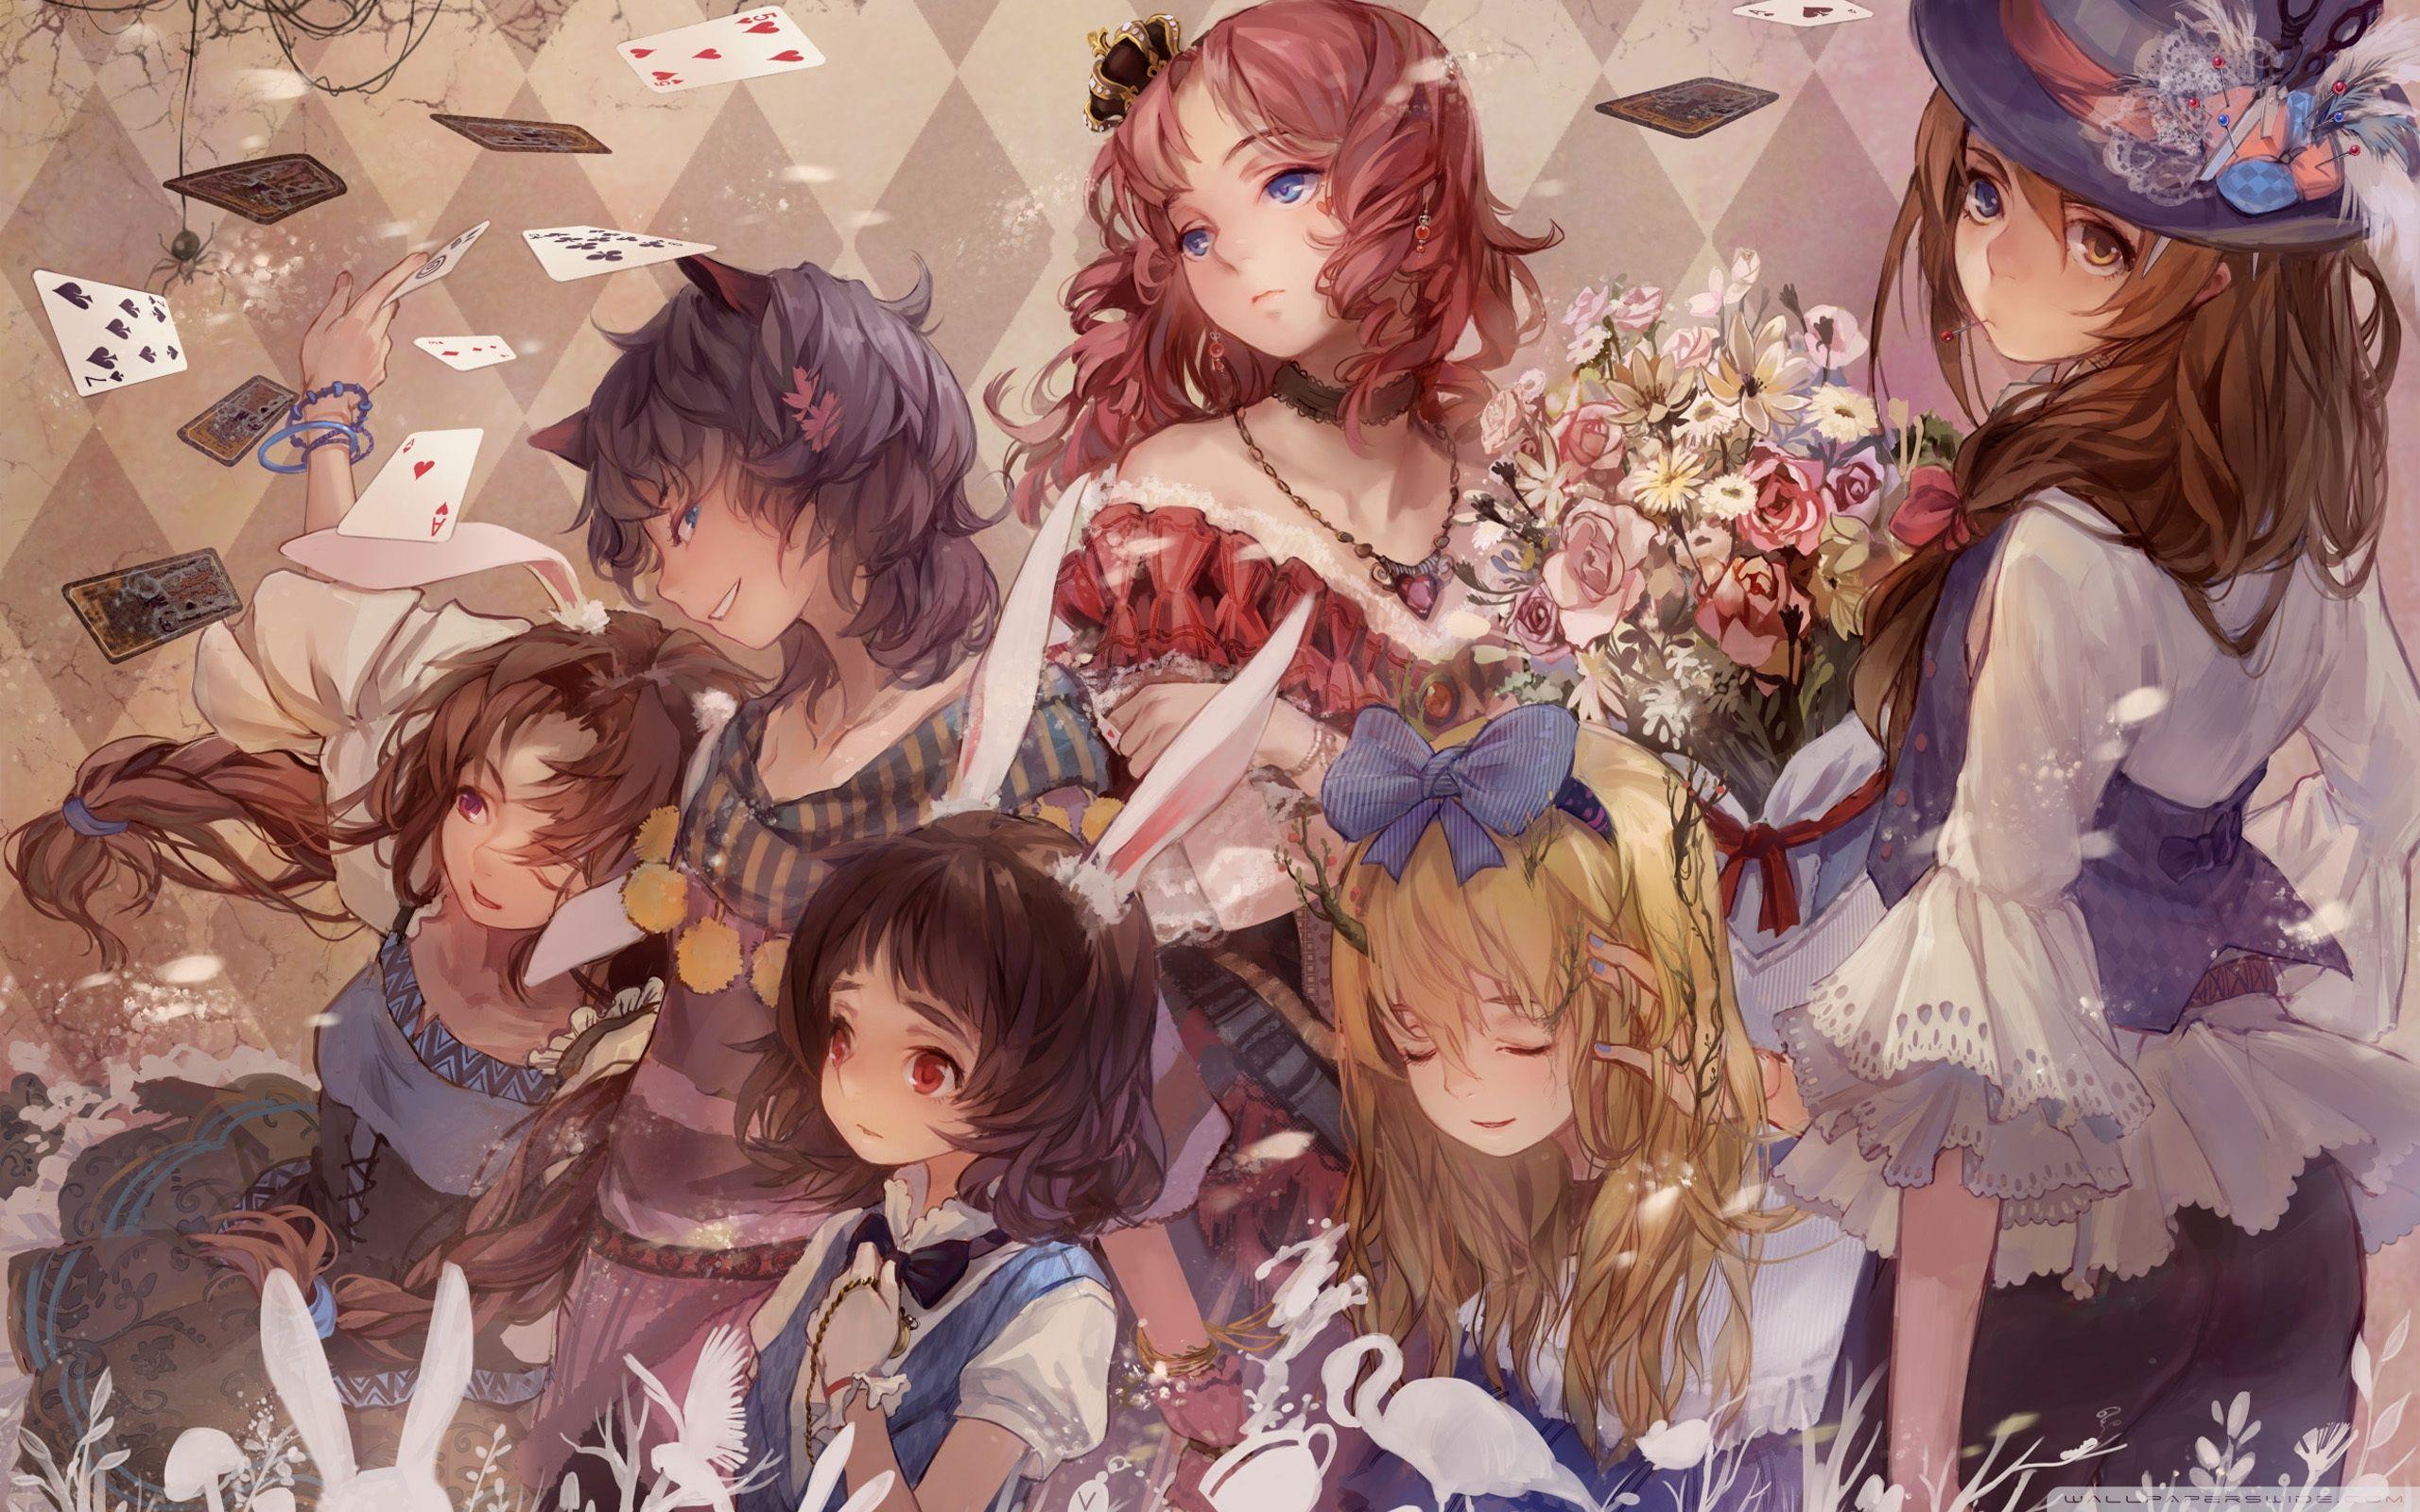 Alice In Wonderland Anime Wallpapers Top Free Alice In Images, Photos, Reviews